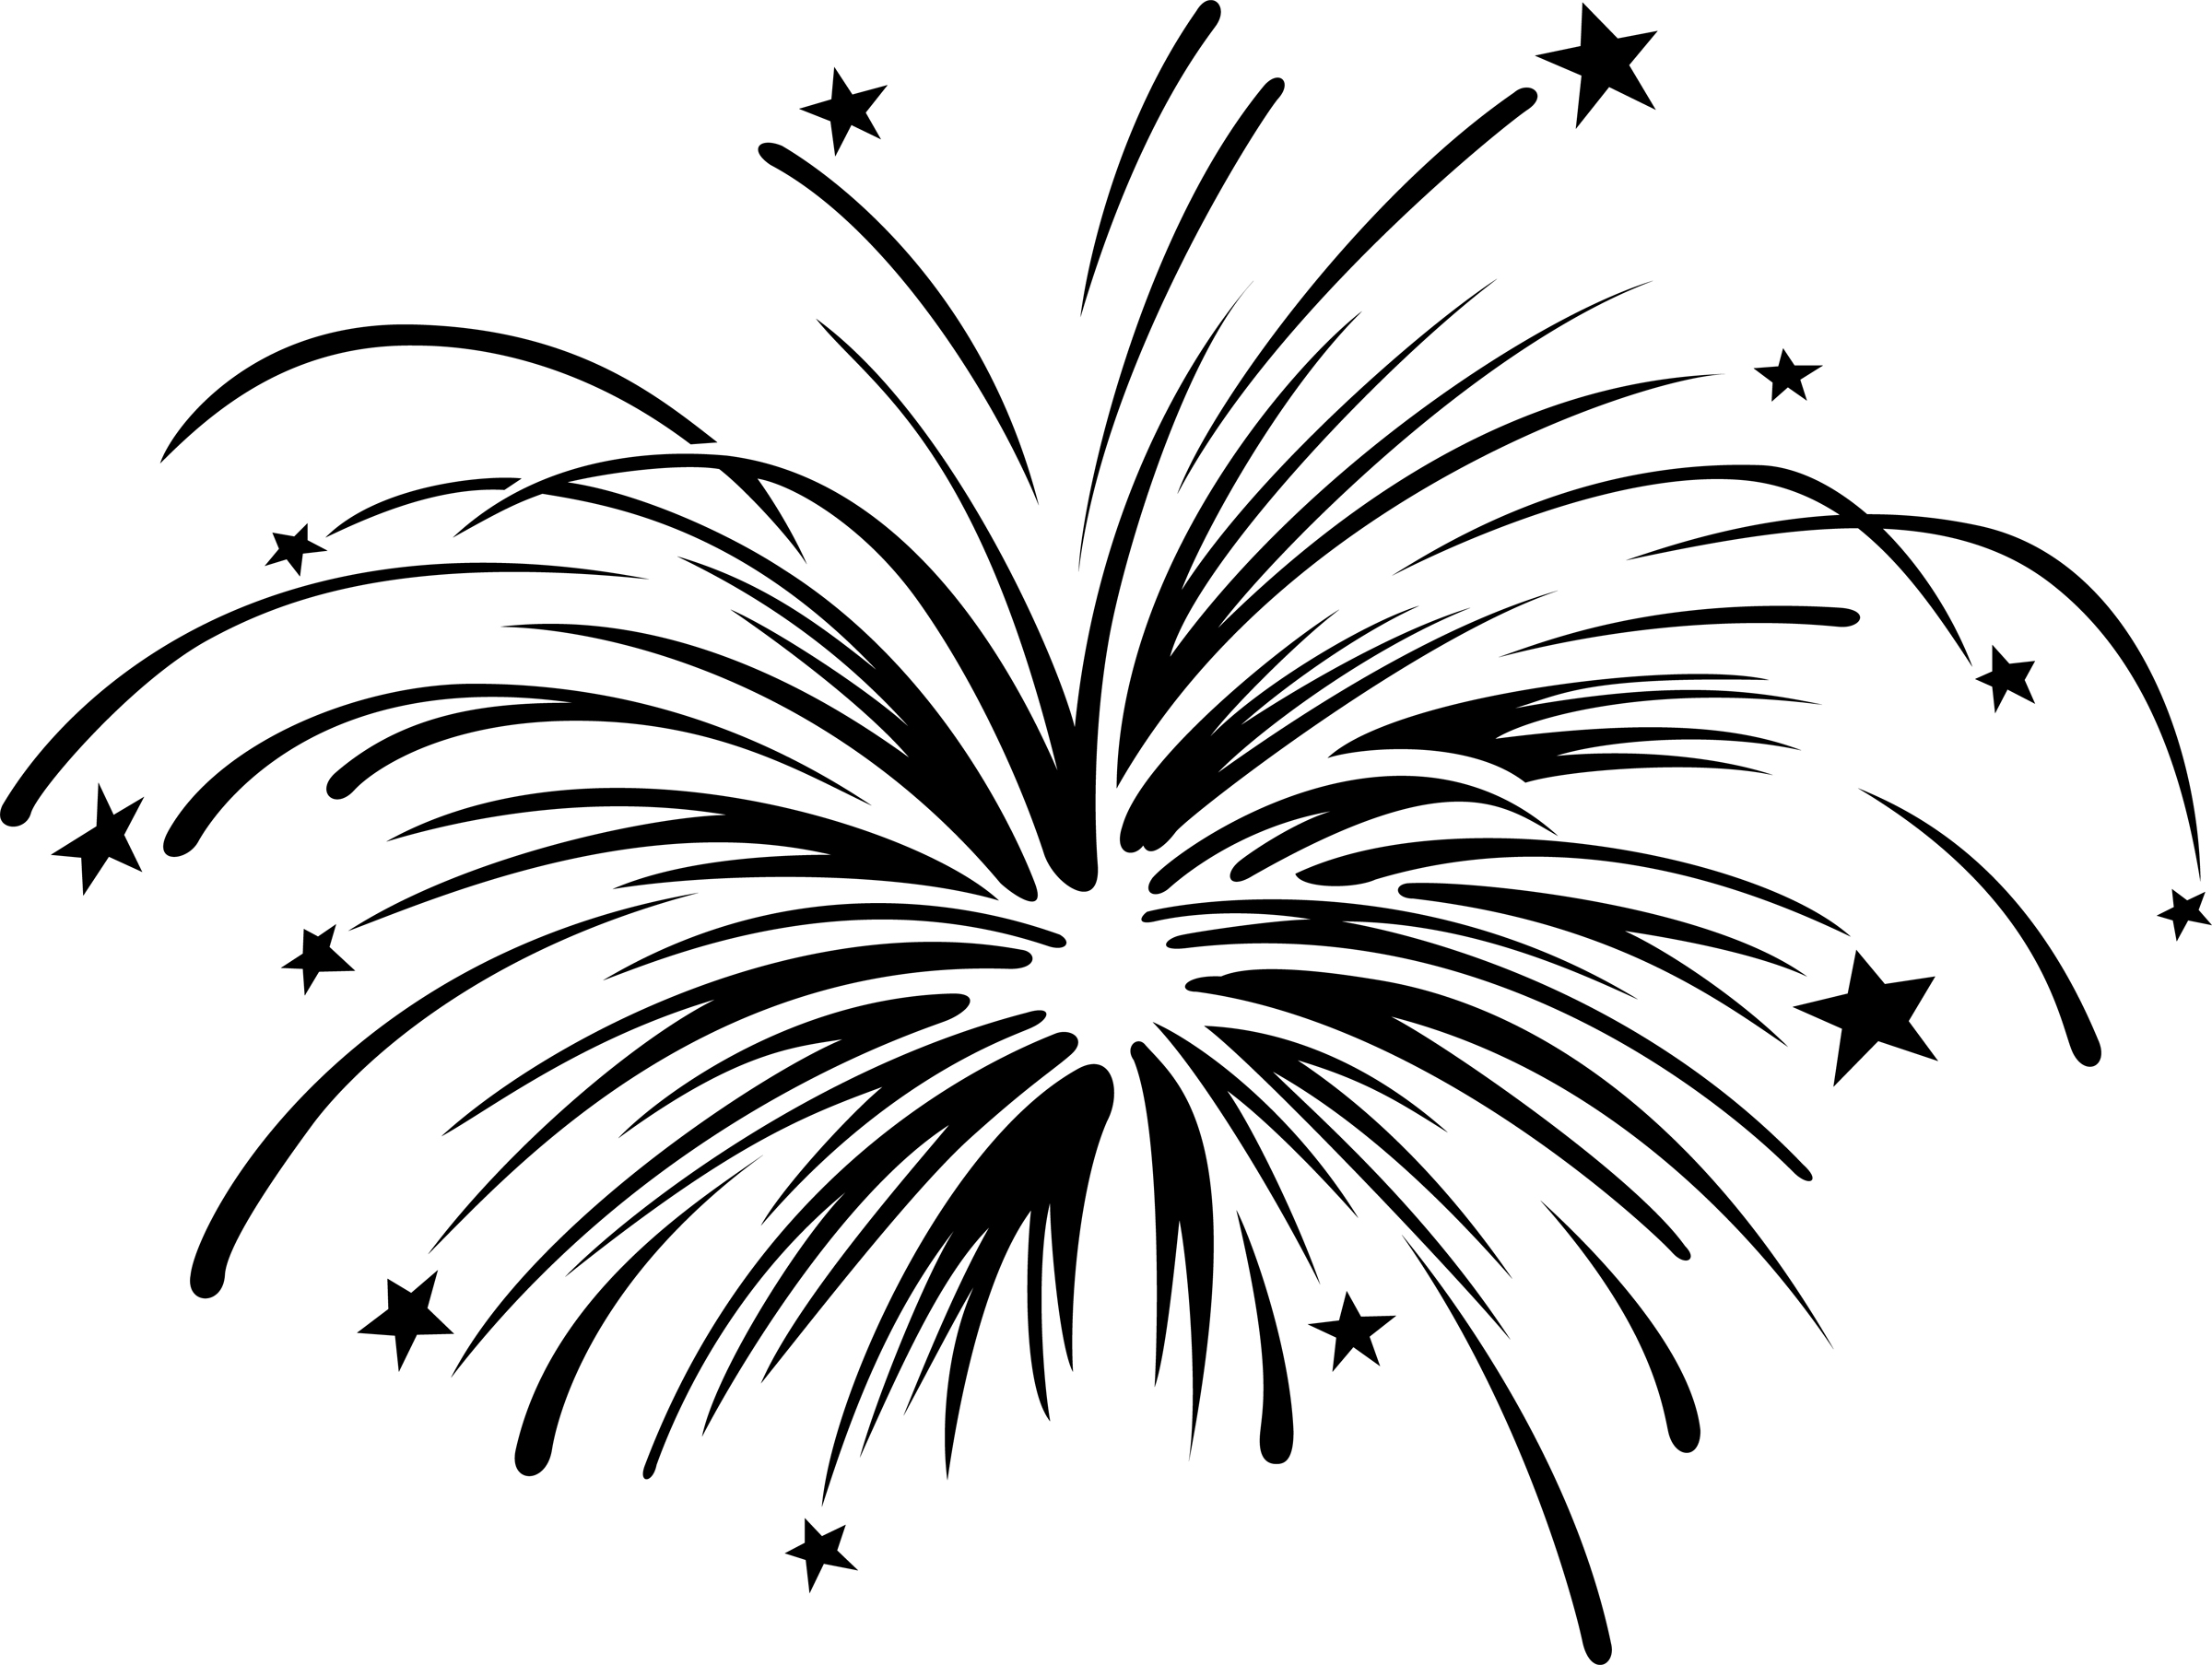 Fireworks clipart black and white free